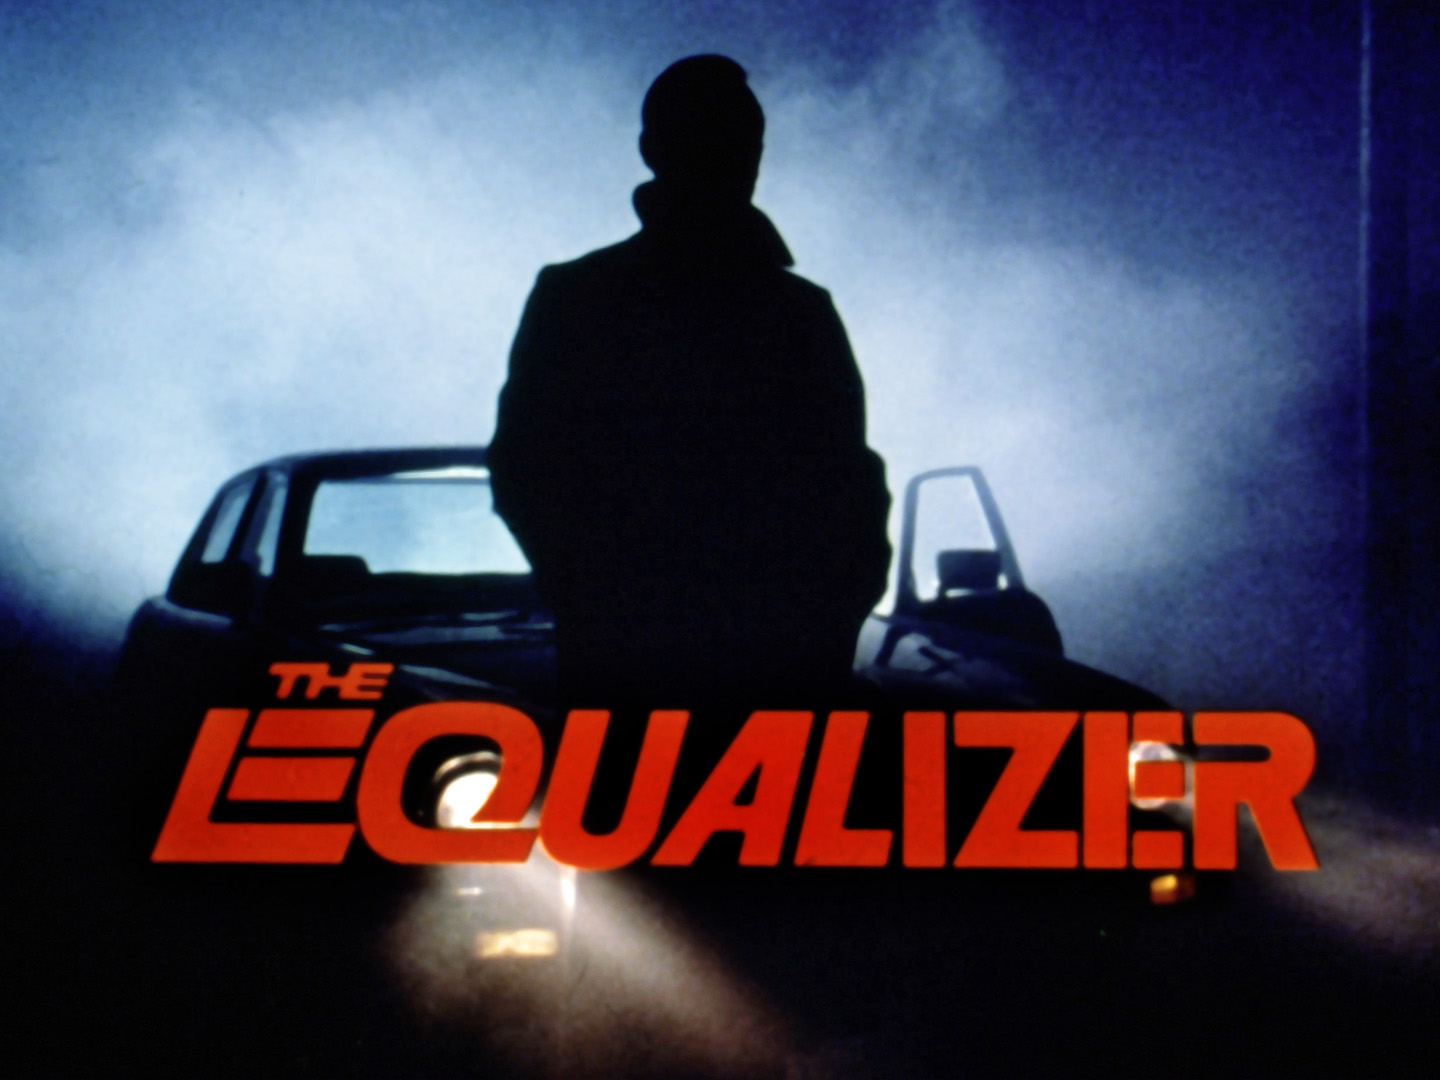 High Resolution Wallpaper | The Equalizer 1440x1080 px